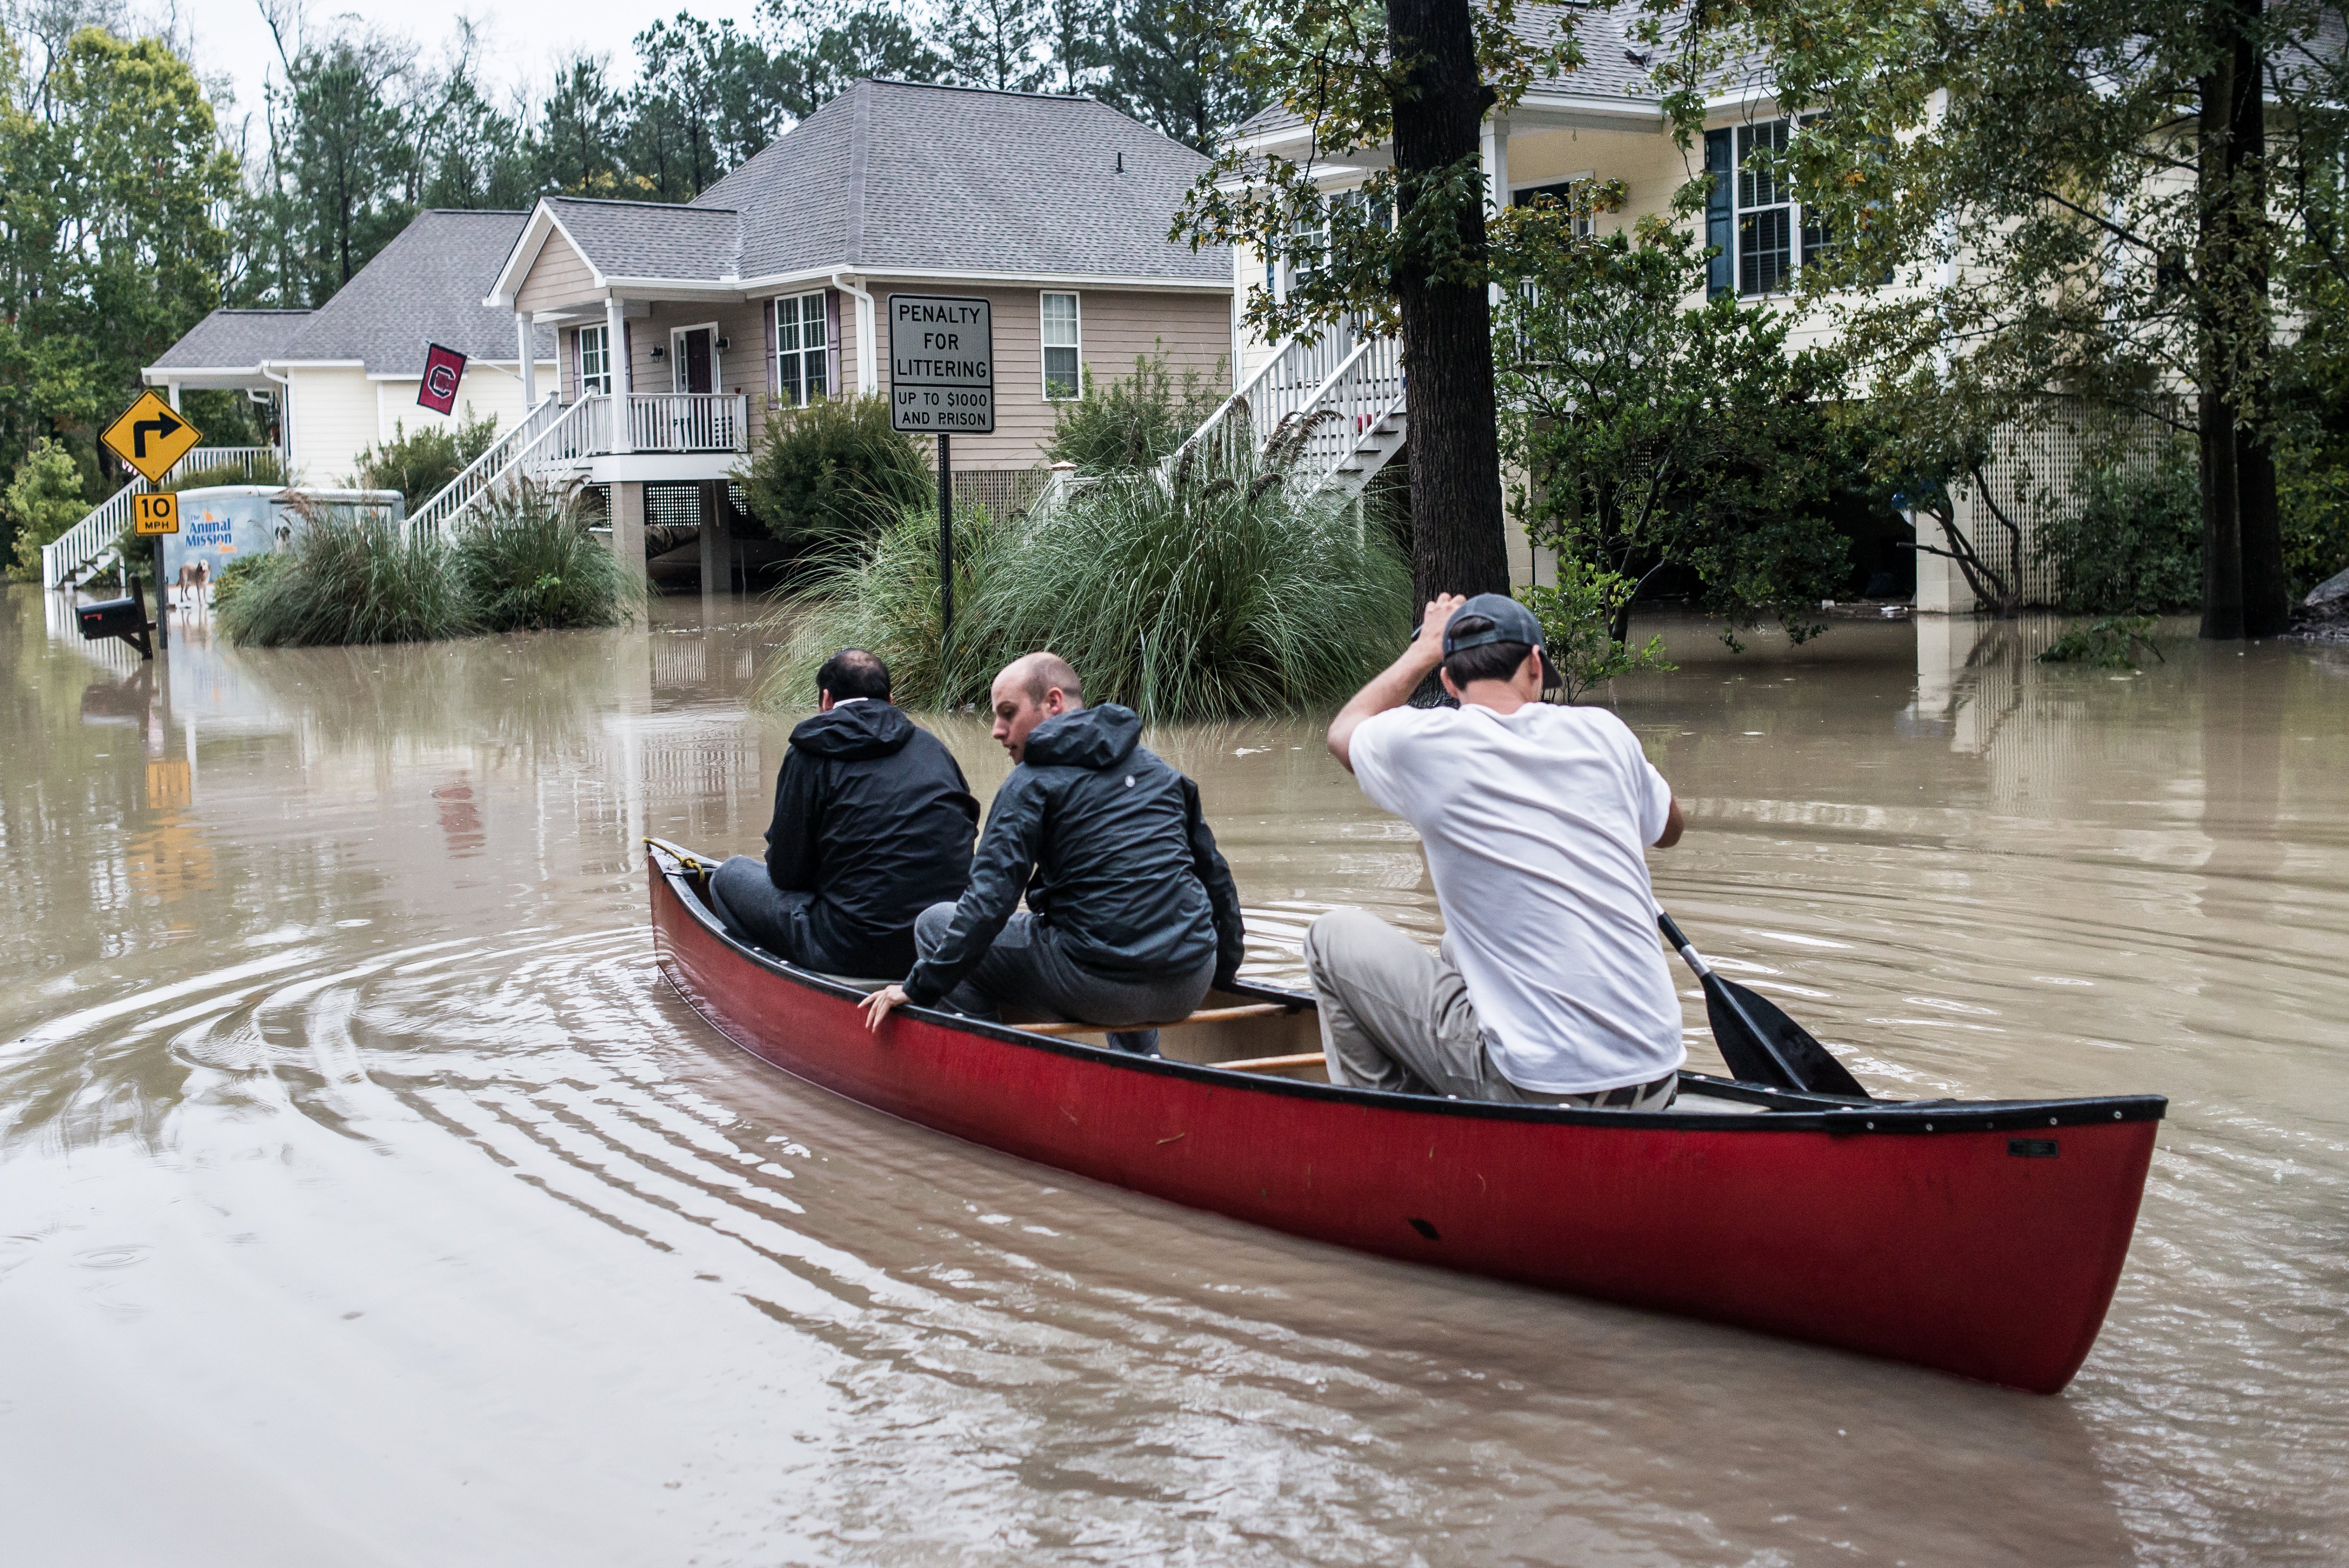 Tyler Bahnmuller, Will Brennan and  Matt Talley take a canoe to investigate following flooding in the area in Columbia, S.C., on Oct. 5, 2015. (Sean Rayford—Getty Images)